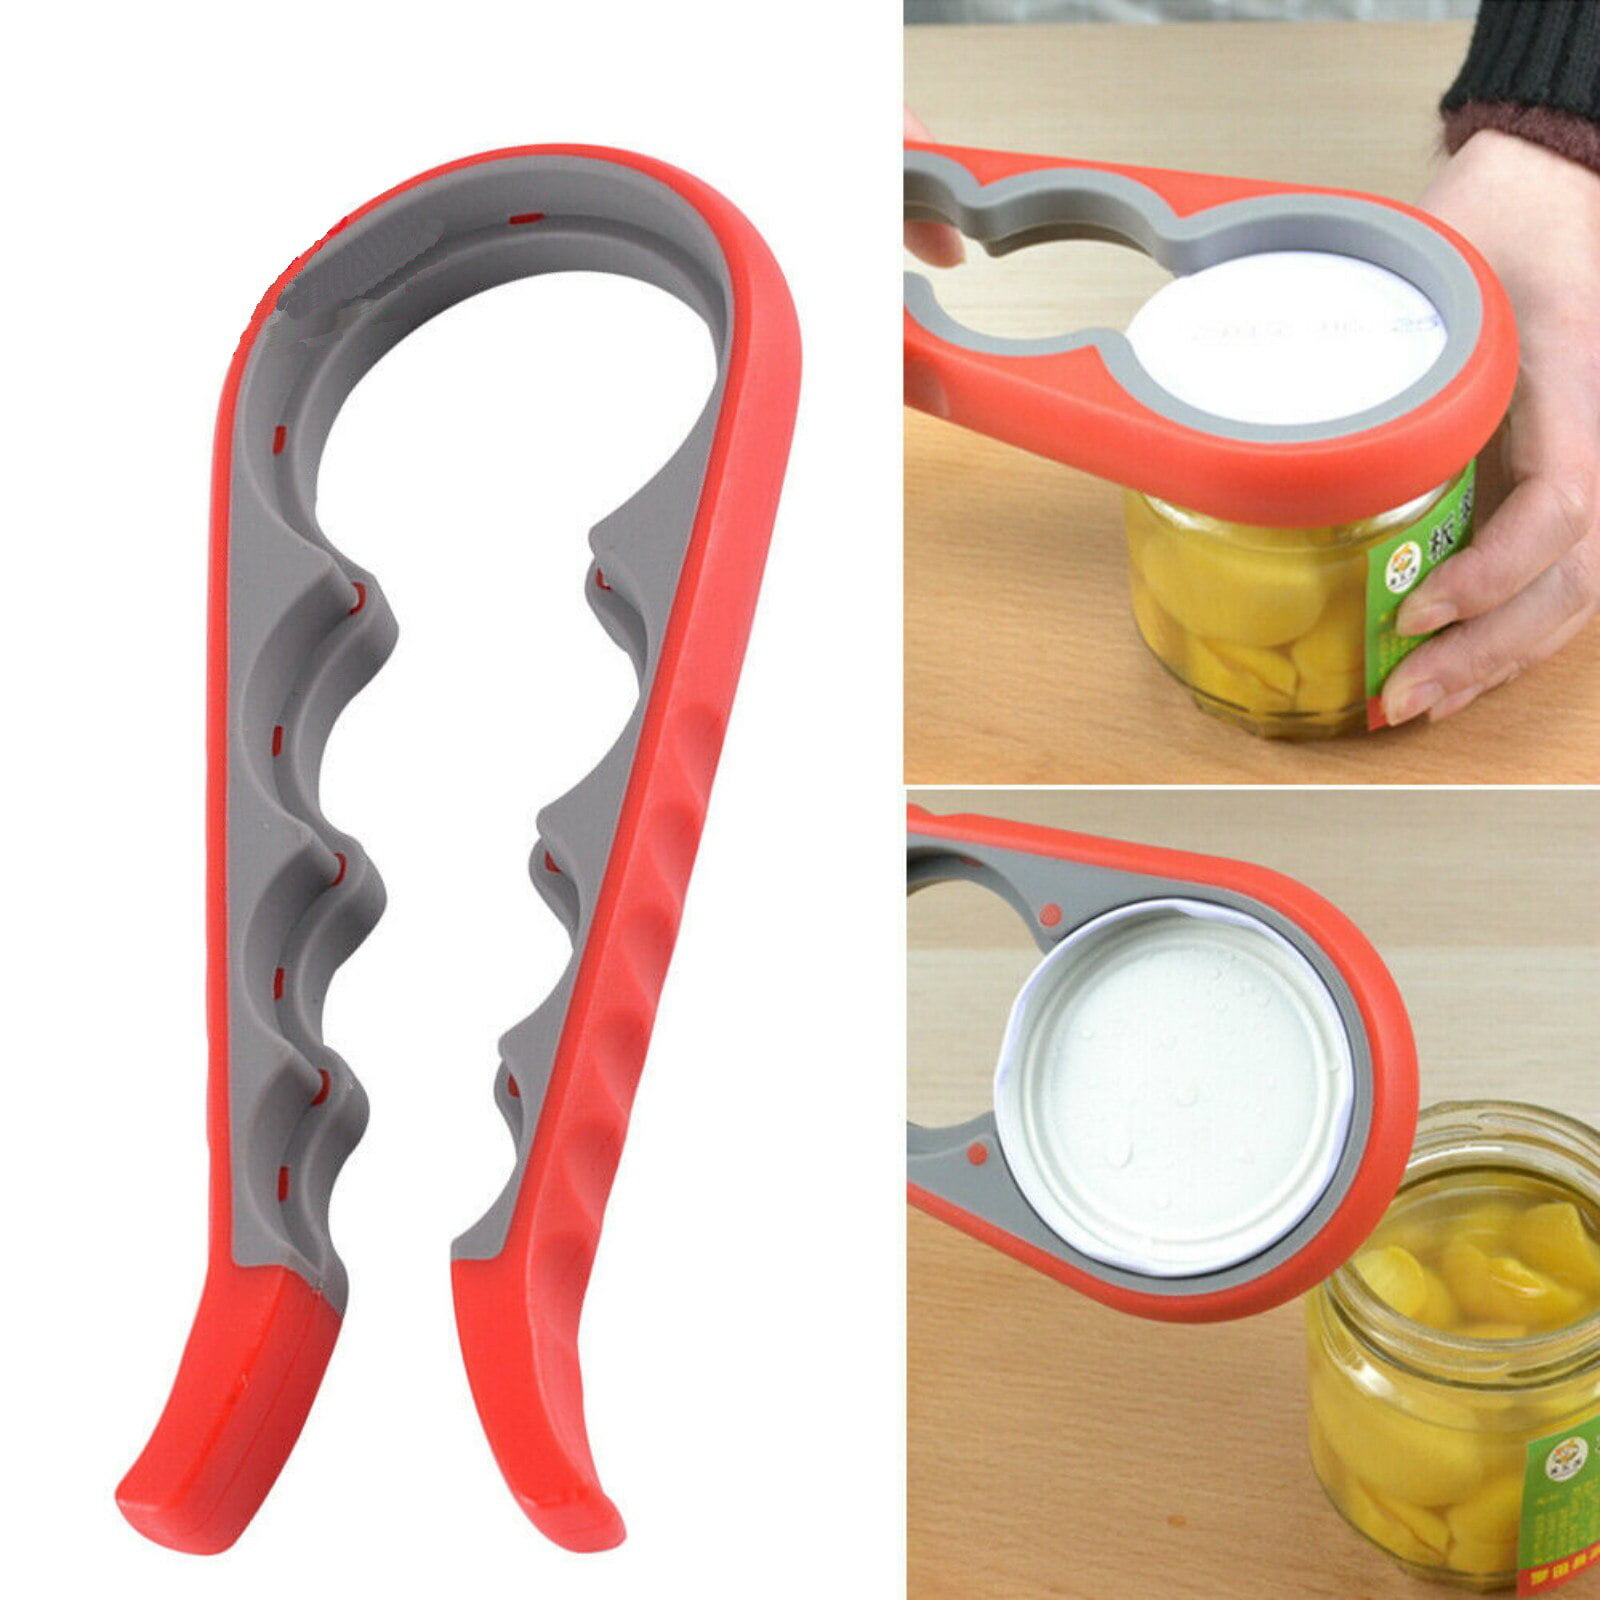 Rubber Can Opener for Seniors/Arthritis Kitchen Grippers to Remove Stubborn Lids Anti-Skid Jar Opener Caps and Bottles Great Kitchen Gadgets 1 Pack Red